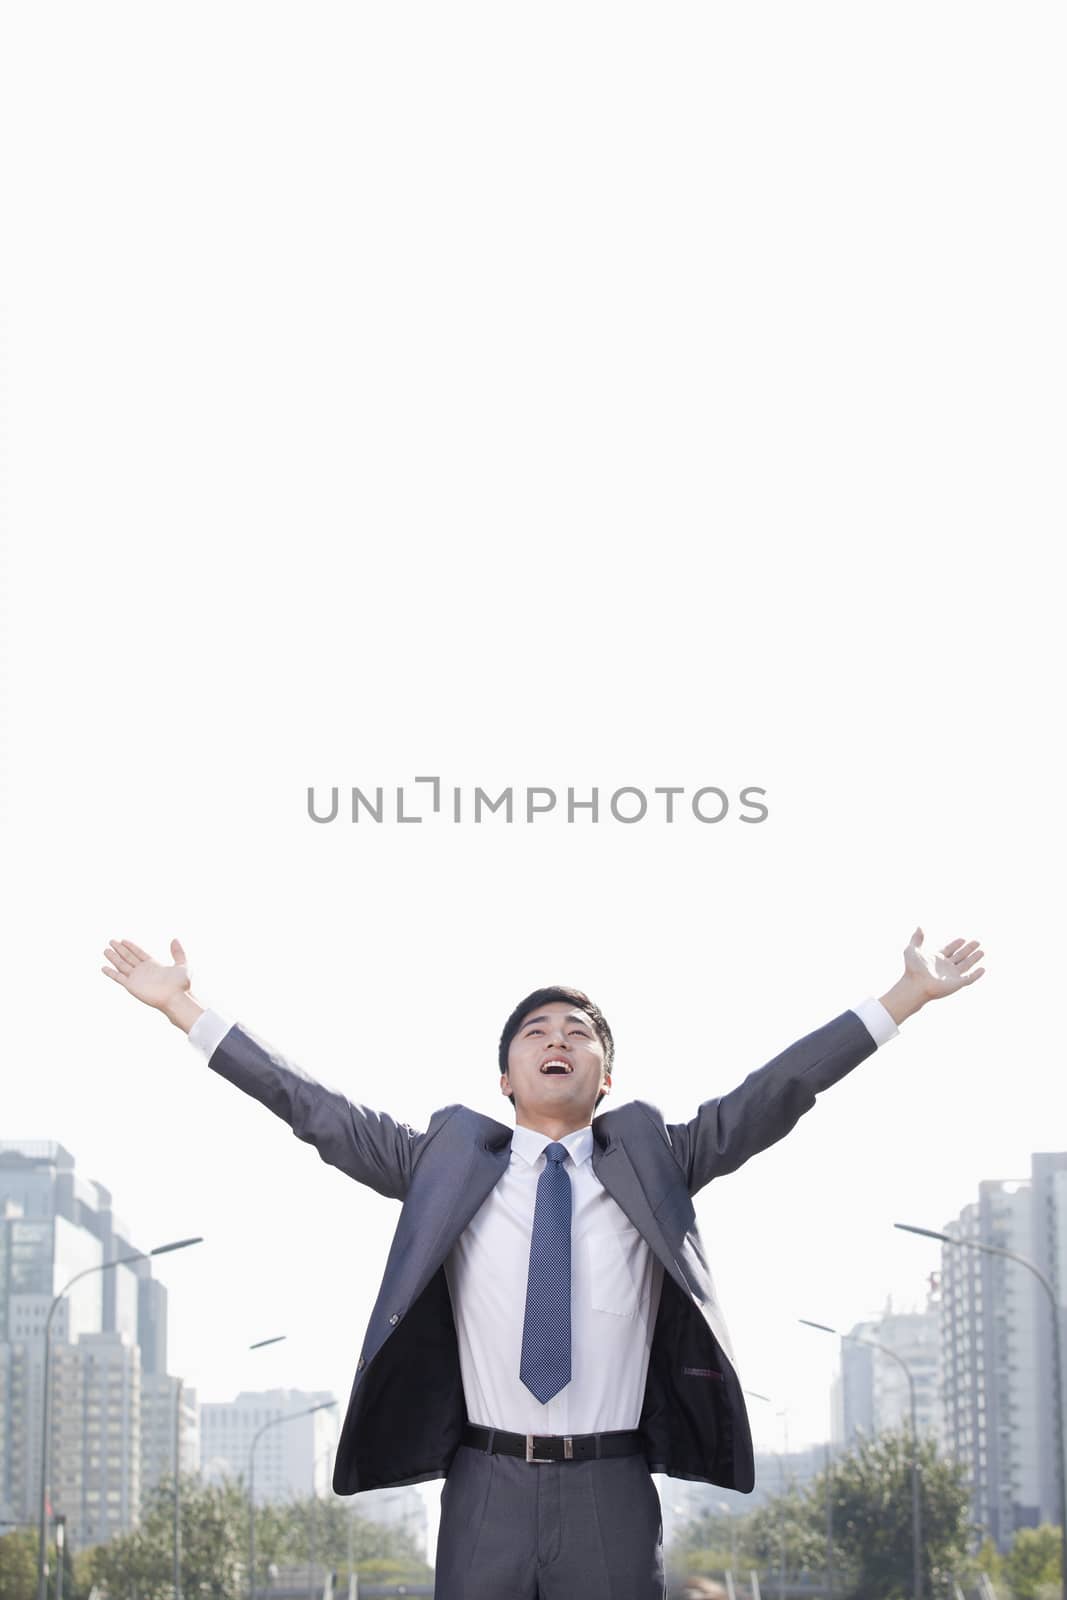 Young Businessman with Arms Raised